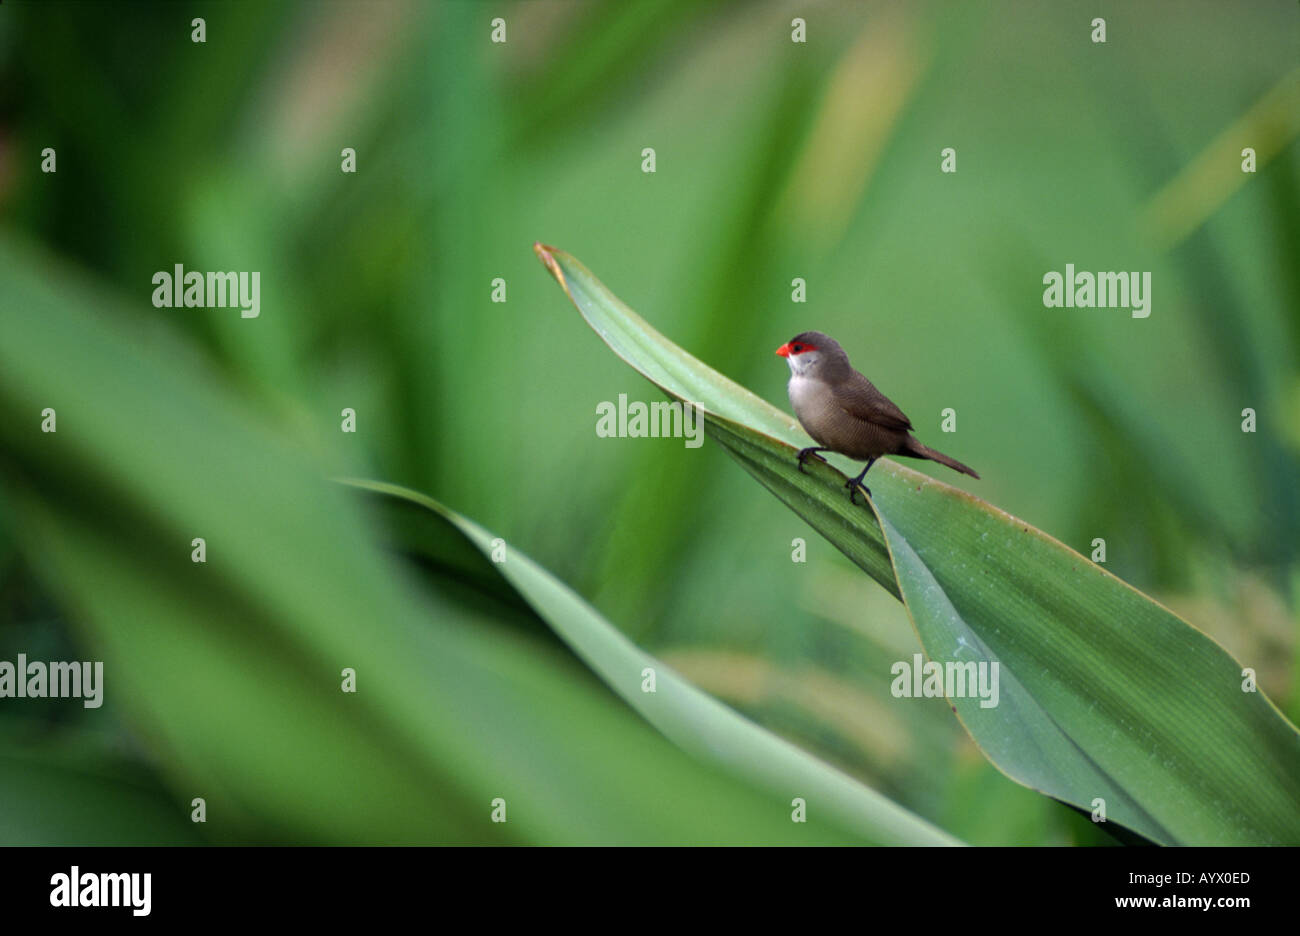 Common waxbill, Estrilda astrild, perched on the broad leaves on an ornamental plant in a  Oahu (Hawaii) park. Stock Photo